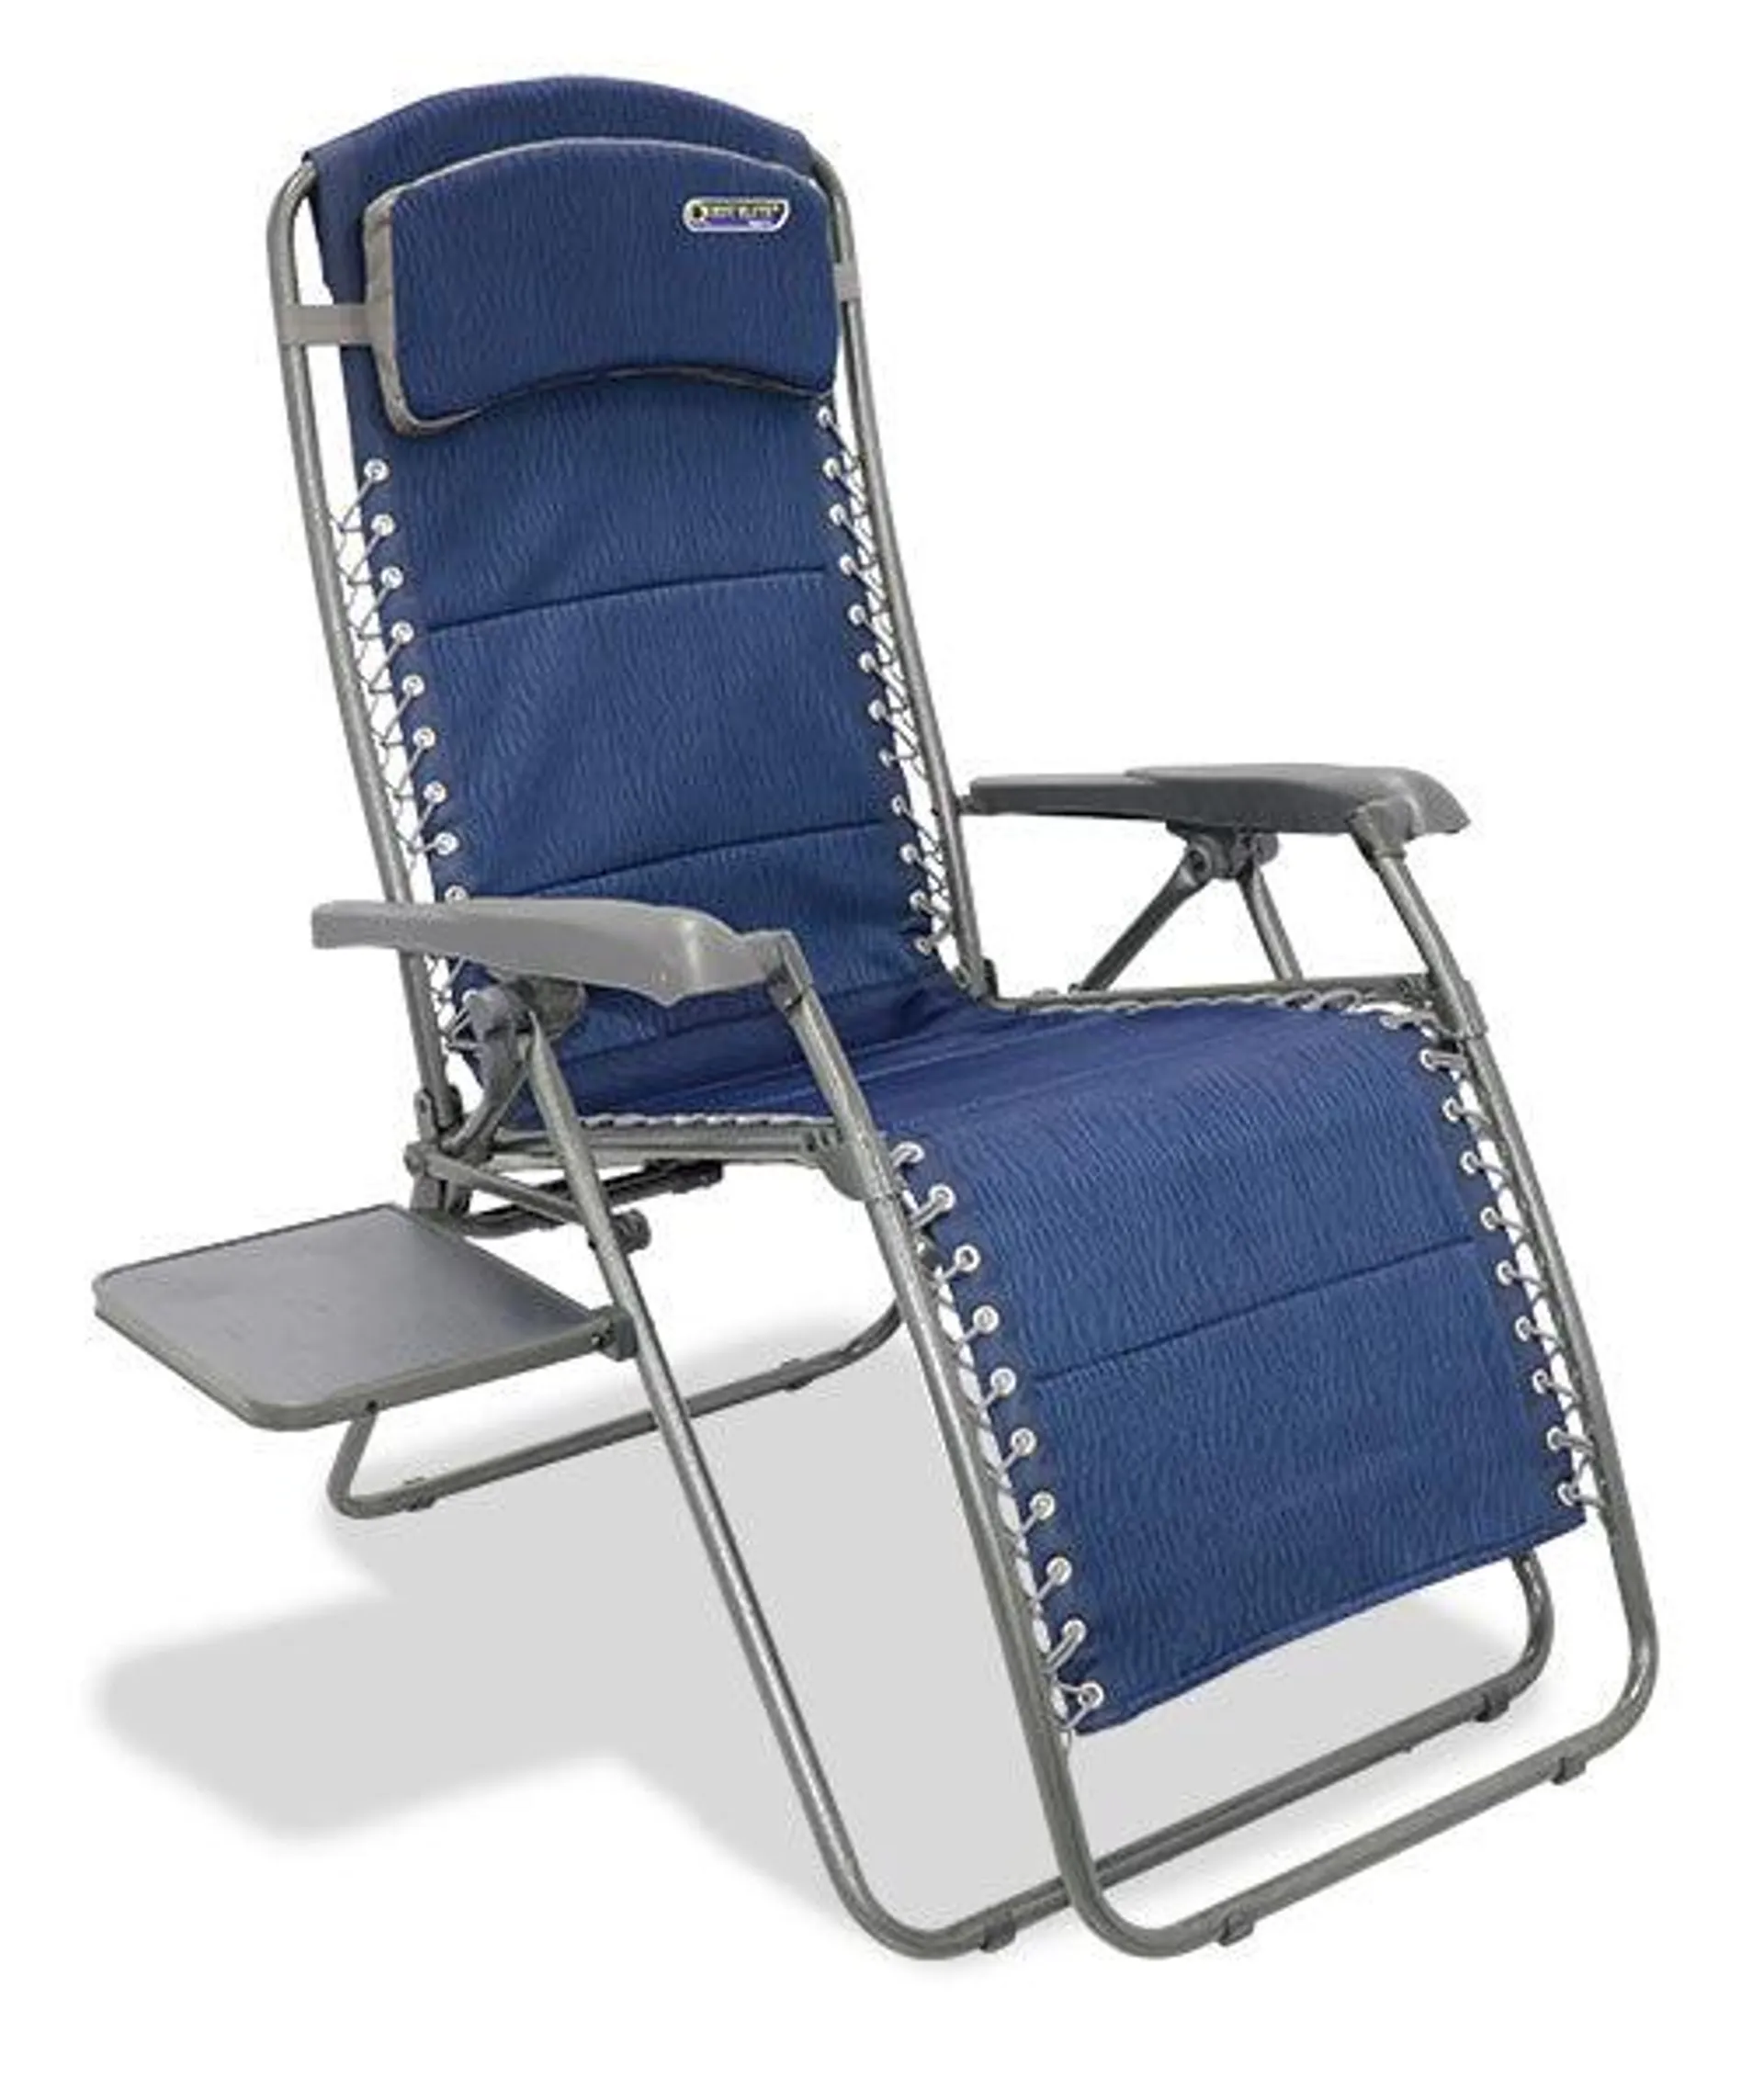 Quest Leisure Ragley Pro Relaxer-Blue Chair